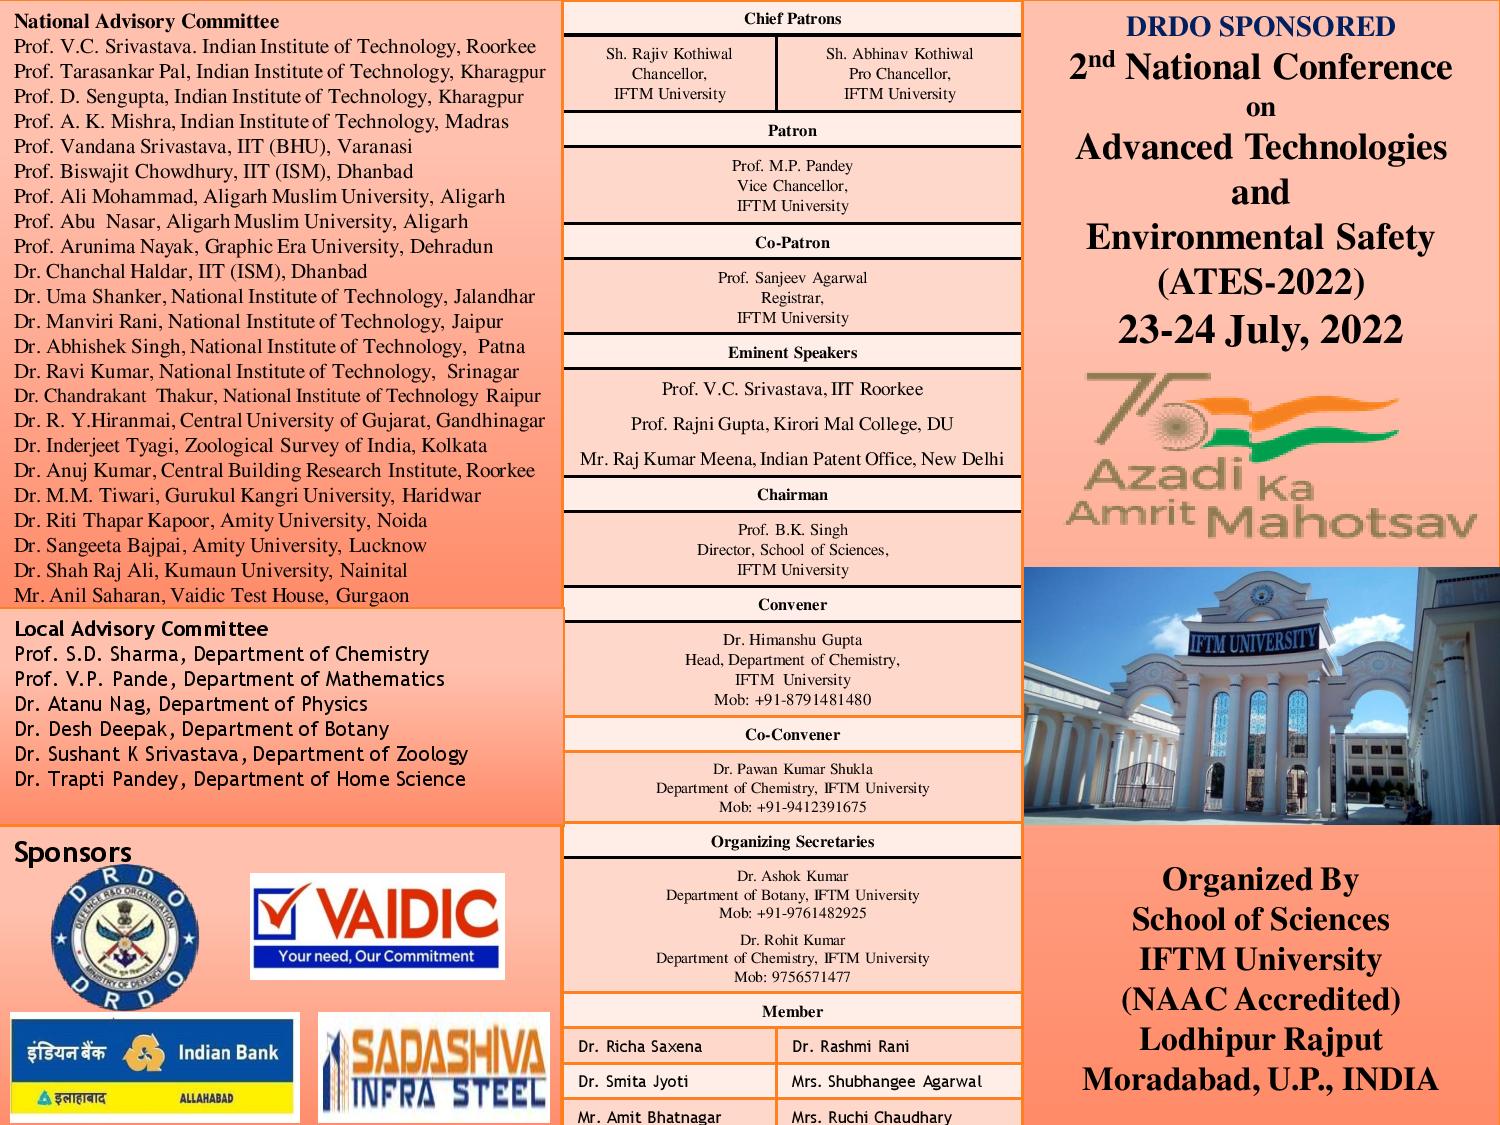 DRDO SPONSORED 2nd National Conference on Advanced Technologies and Environmental Safety (ATES-2022)